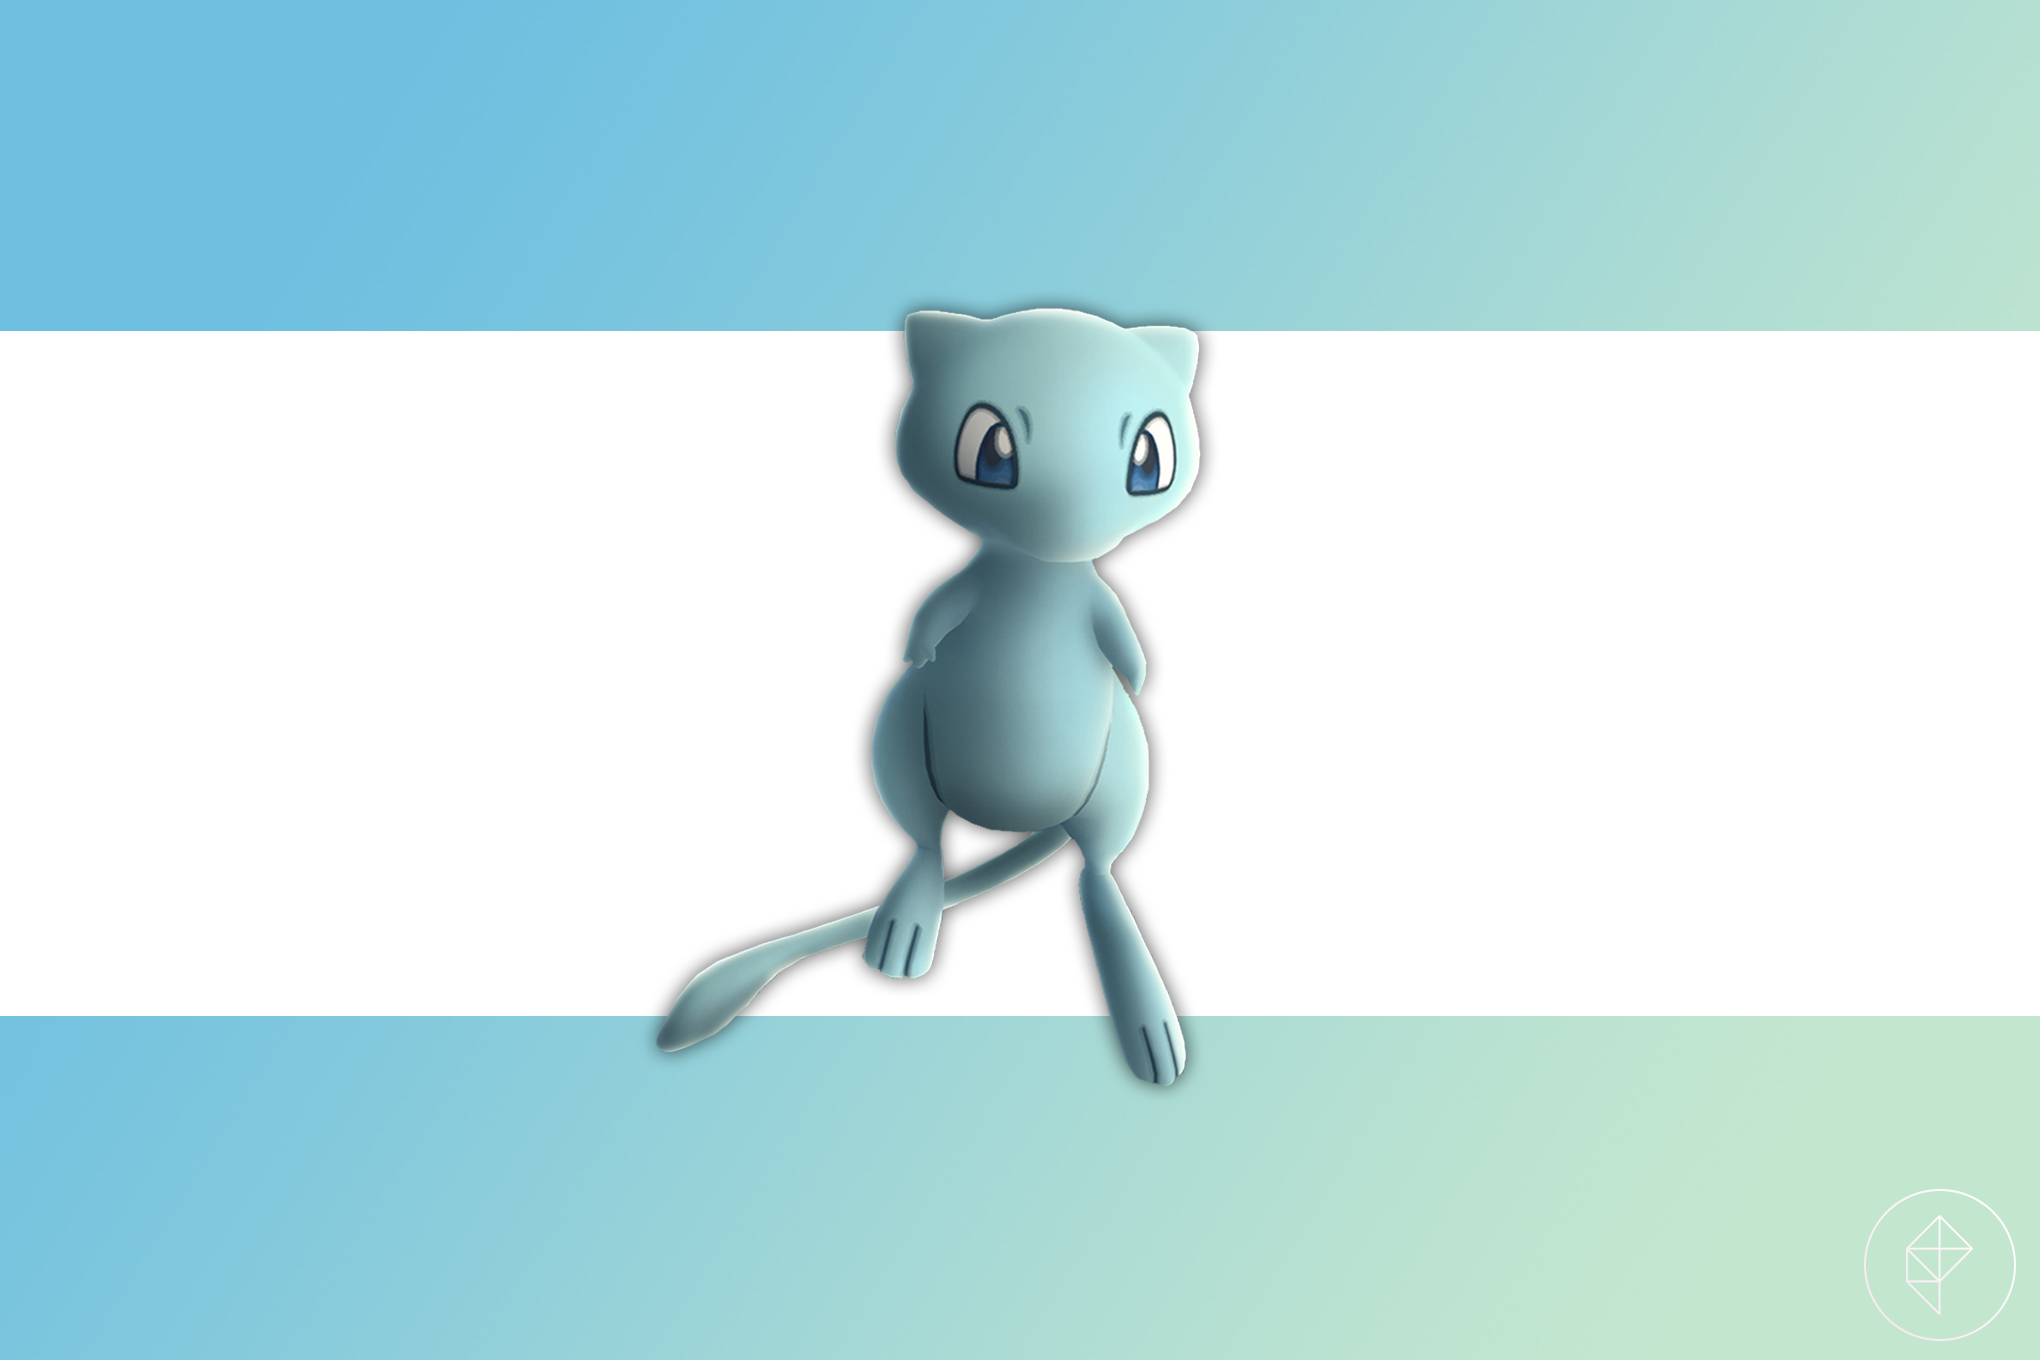 A blue shiny Mew from Pokémon Go on a blue and green gradient background